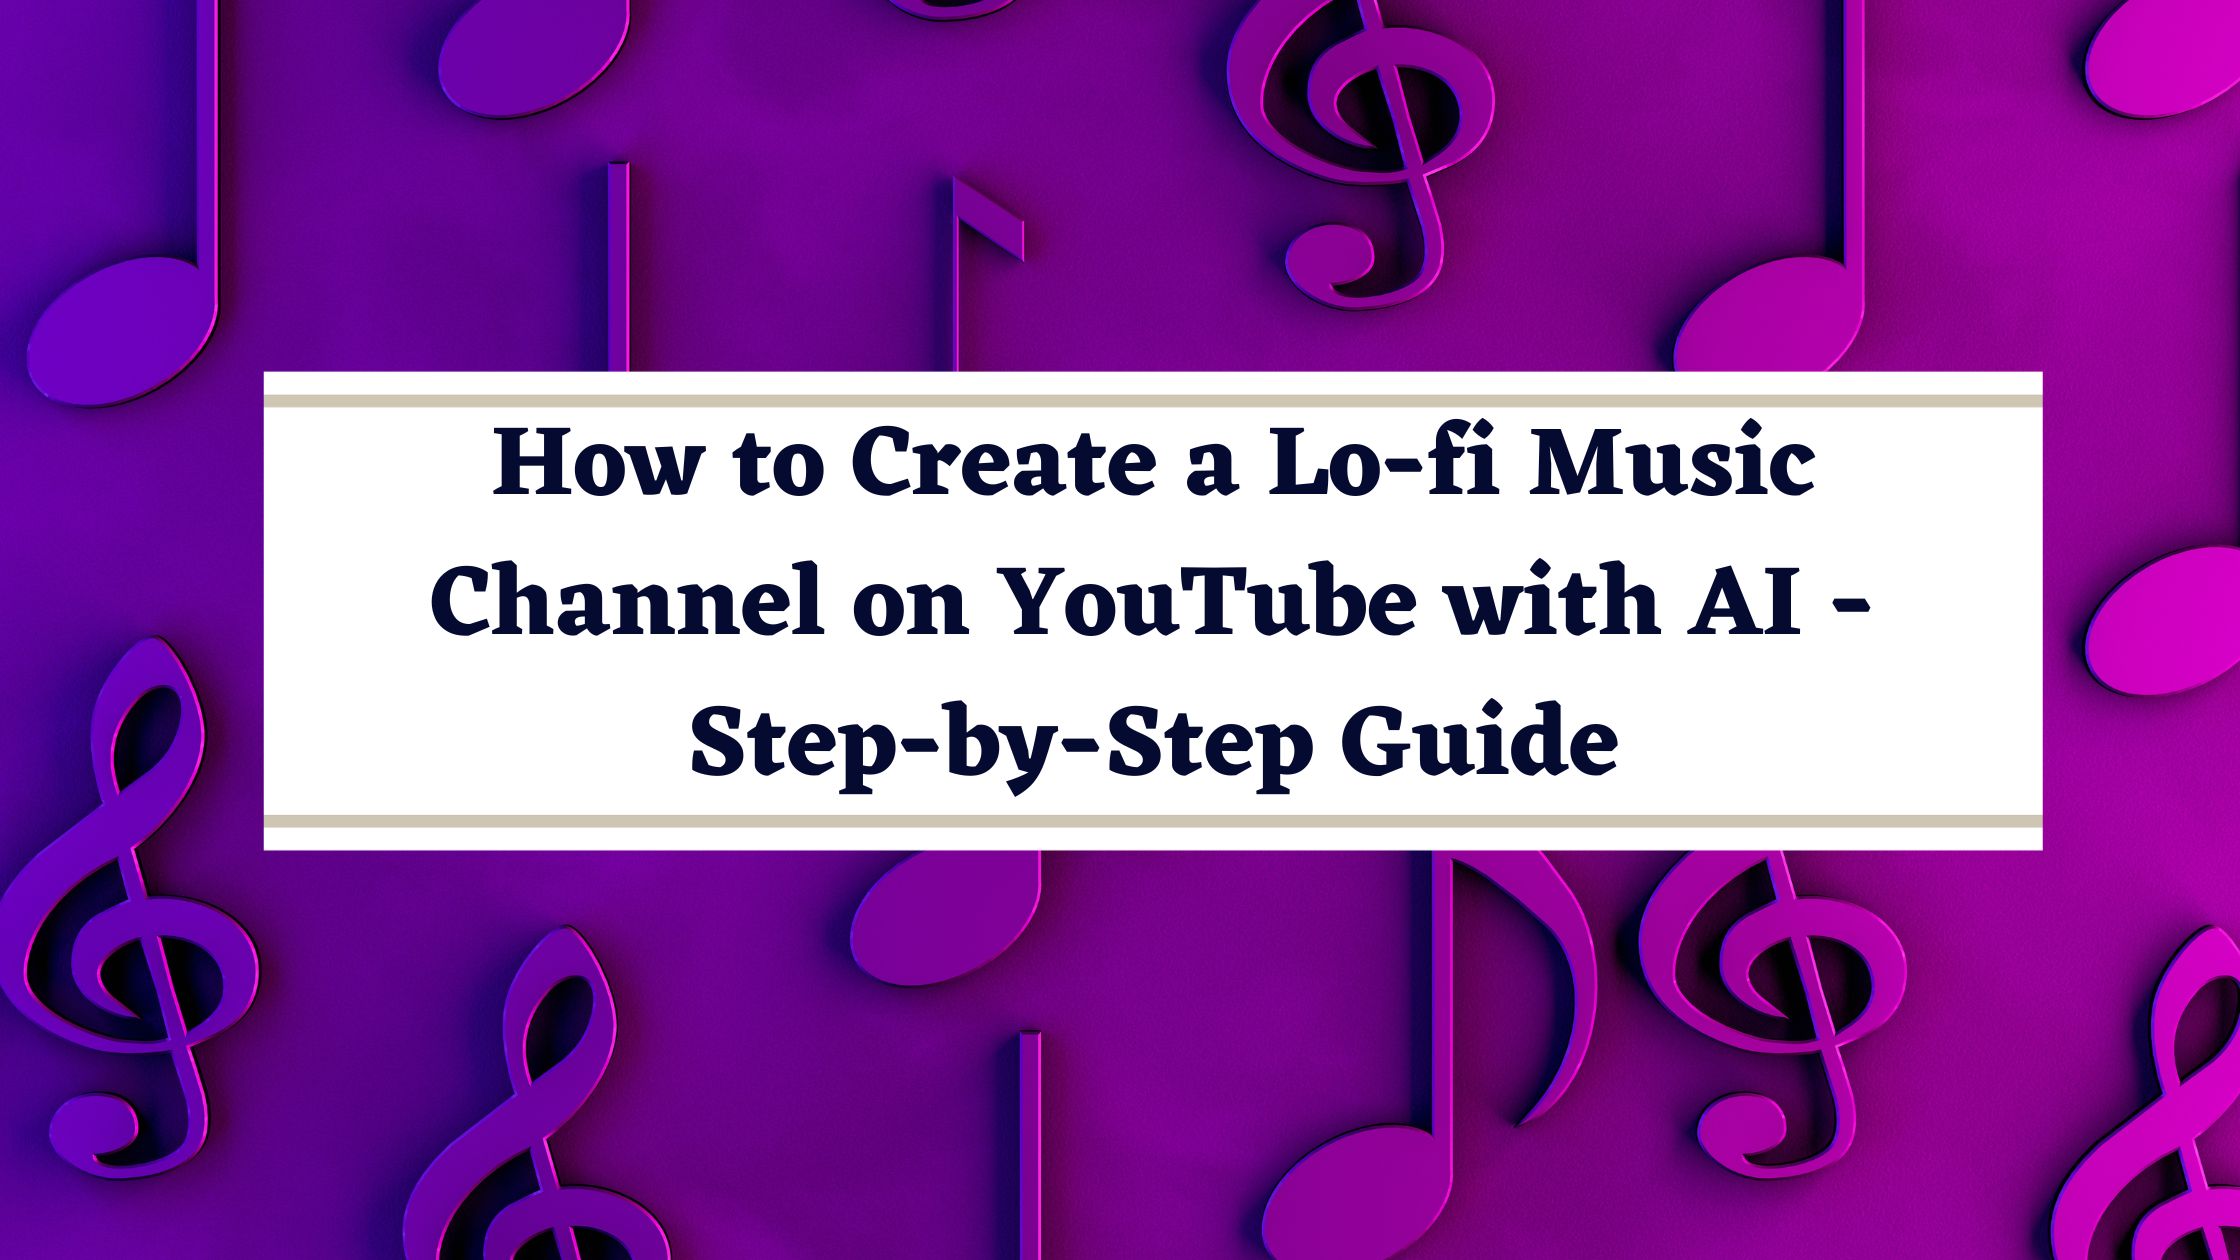 How to Create a Lo-fi Music Channel on YouTube with AI - Step-by-Step Guide